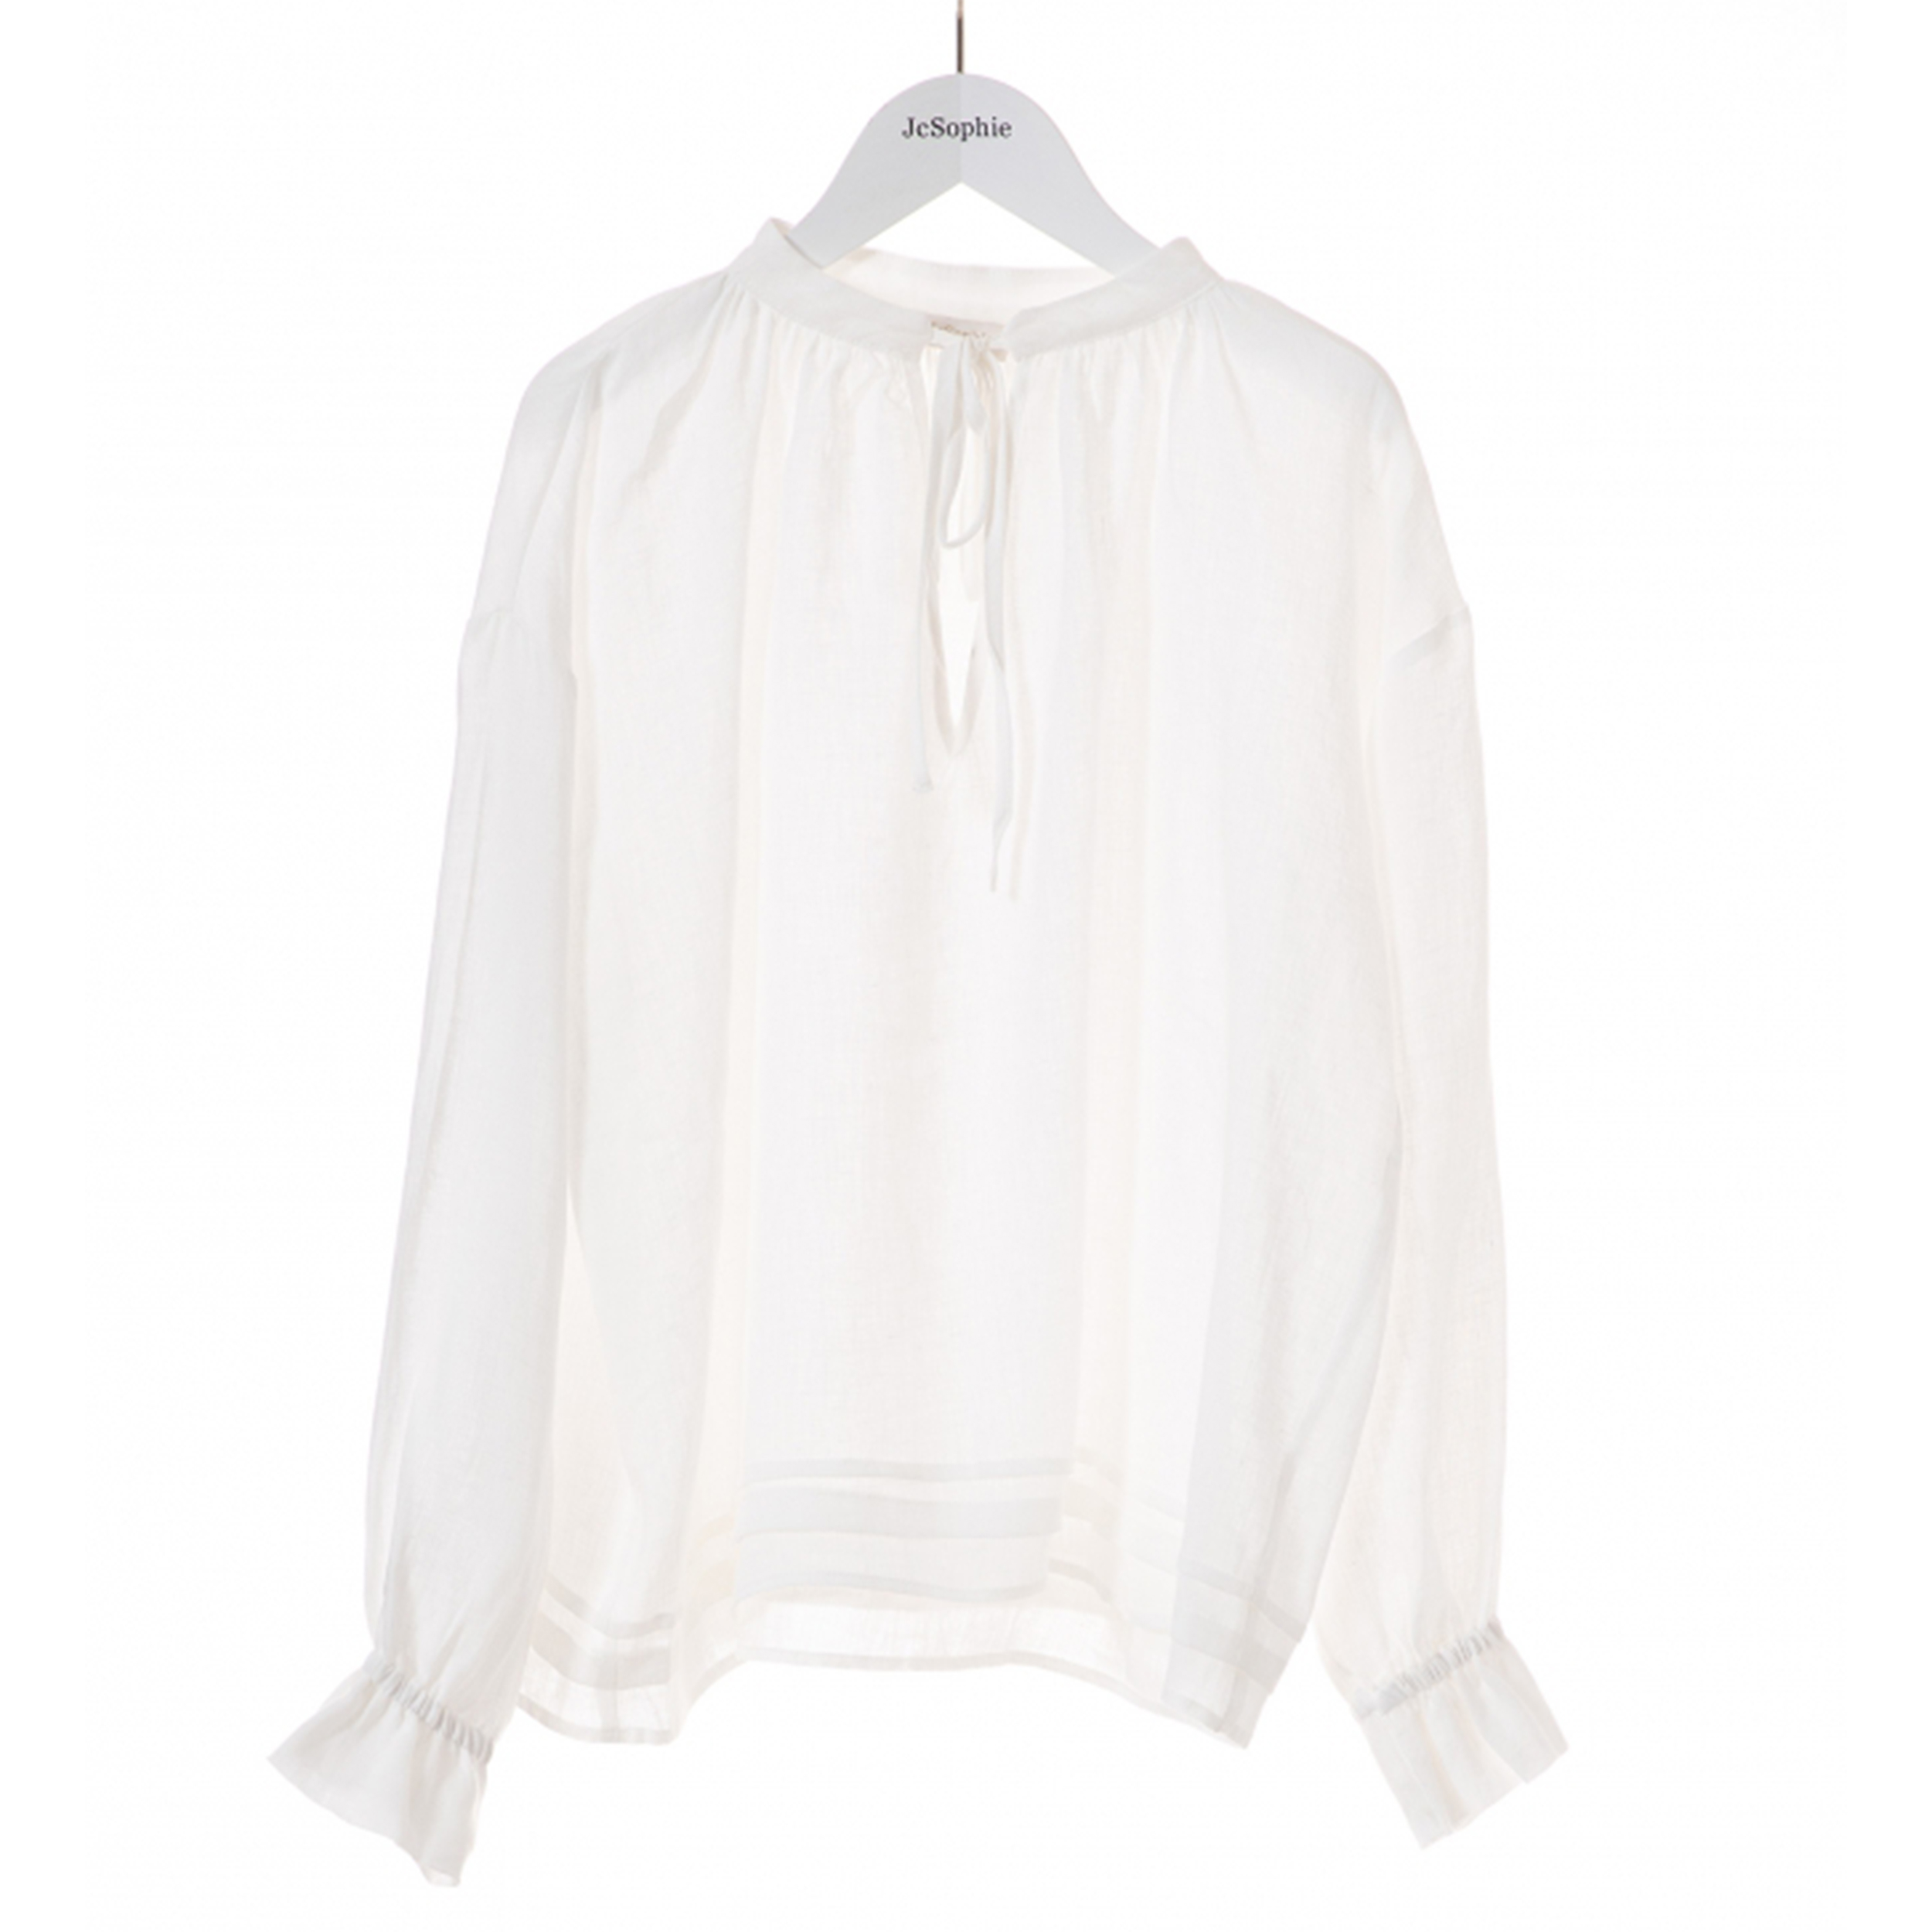 JcSophie Lilybeth Blouse Off White